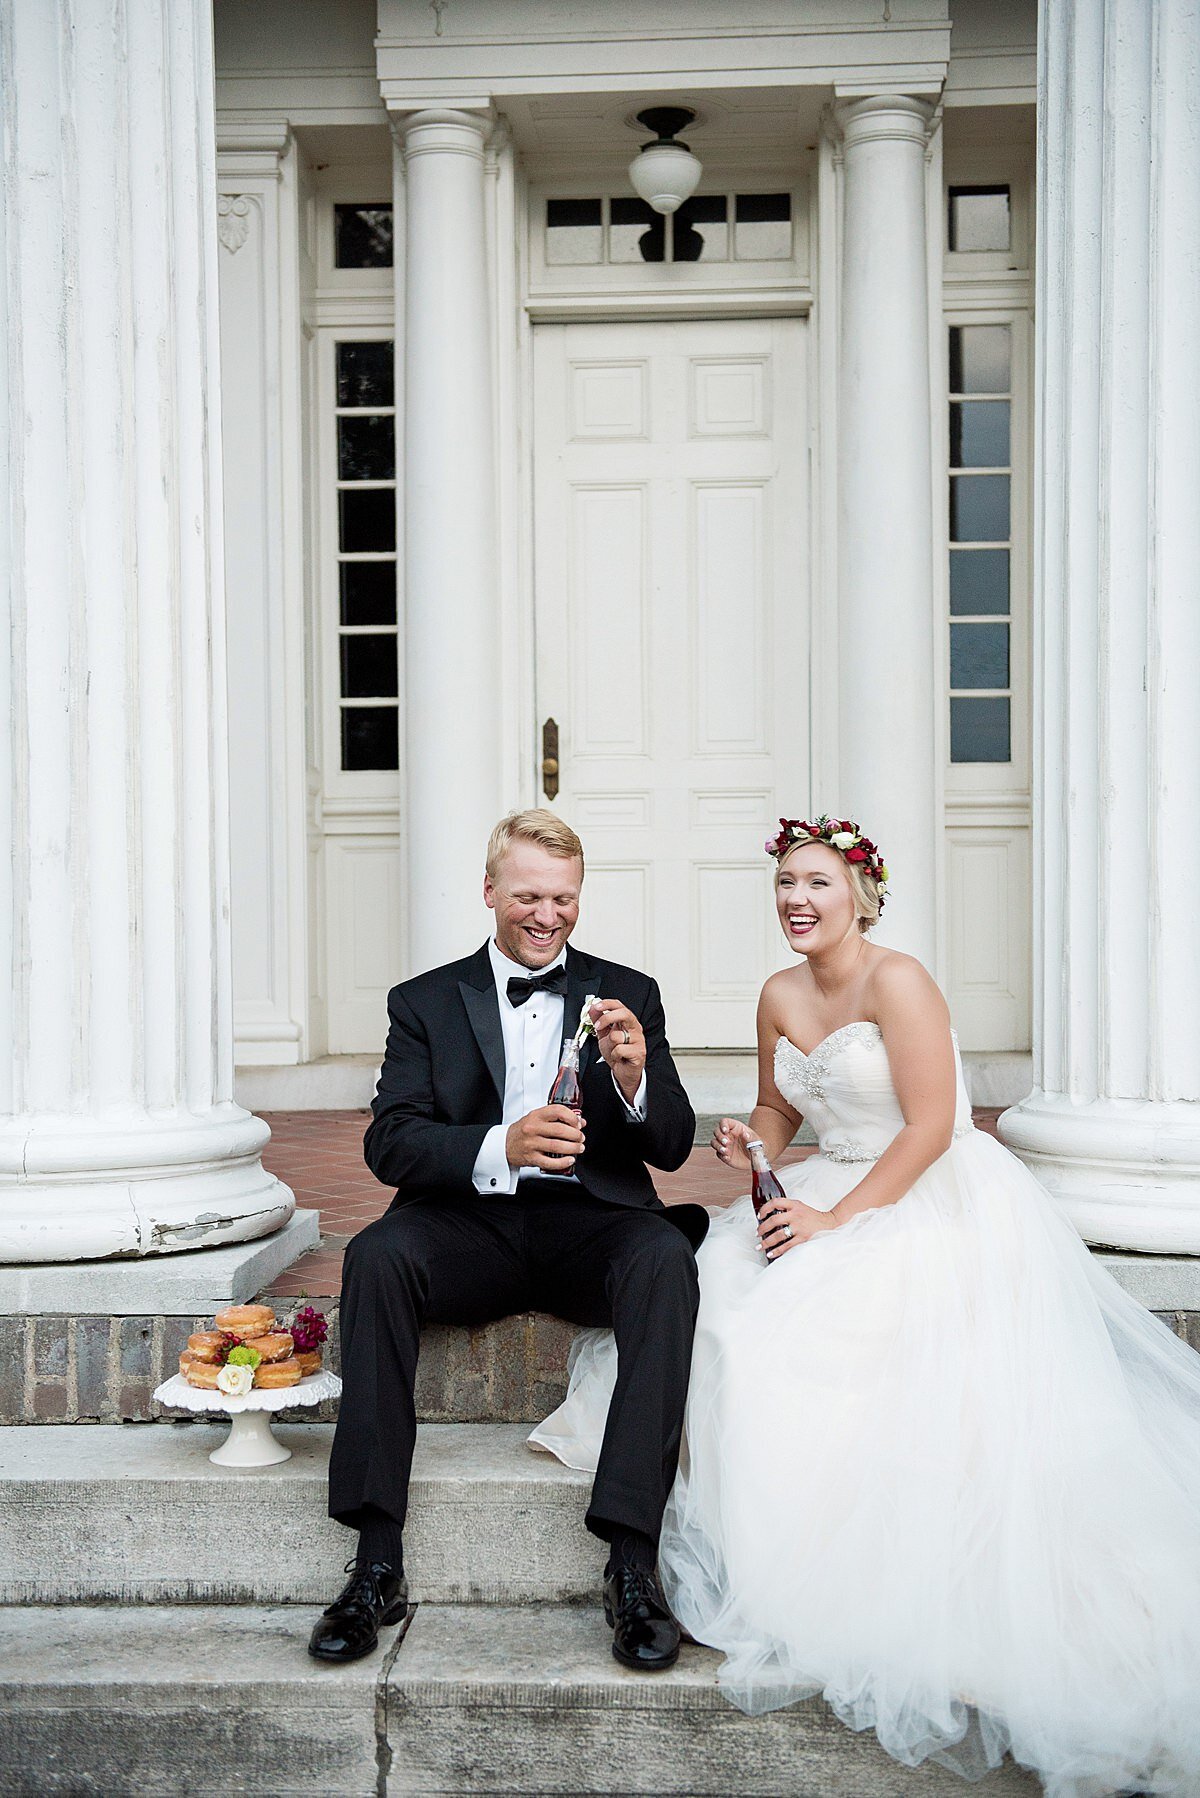 The bride and groom sit on the front steps of Rippavilla Mansion amongst the tall white columns. They are drinking Cheerwine from glass bottles next to a small two tier peach cake on a white pedestal cake stand. The groom is wearing a black tuxedo with a white shirt and black bow tie. The bride is wearing a flower crown with white and red flowers and a strapless dress with a fitted bodice and sweetheart neckline. The tulle skirt of her dress is spread out over the stone steps.